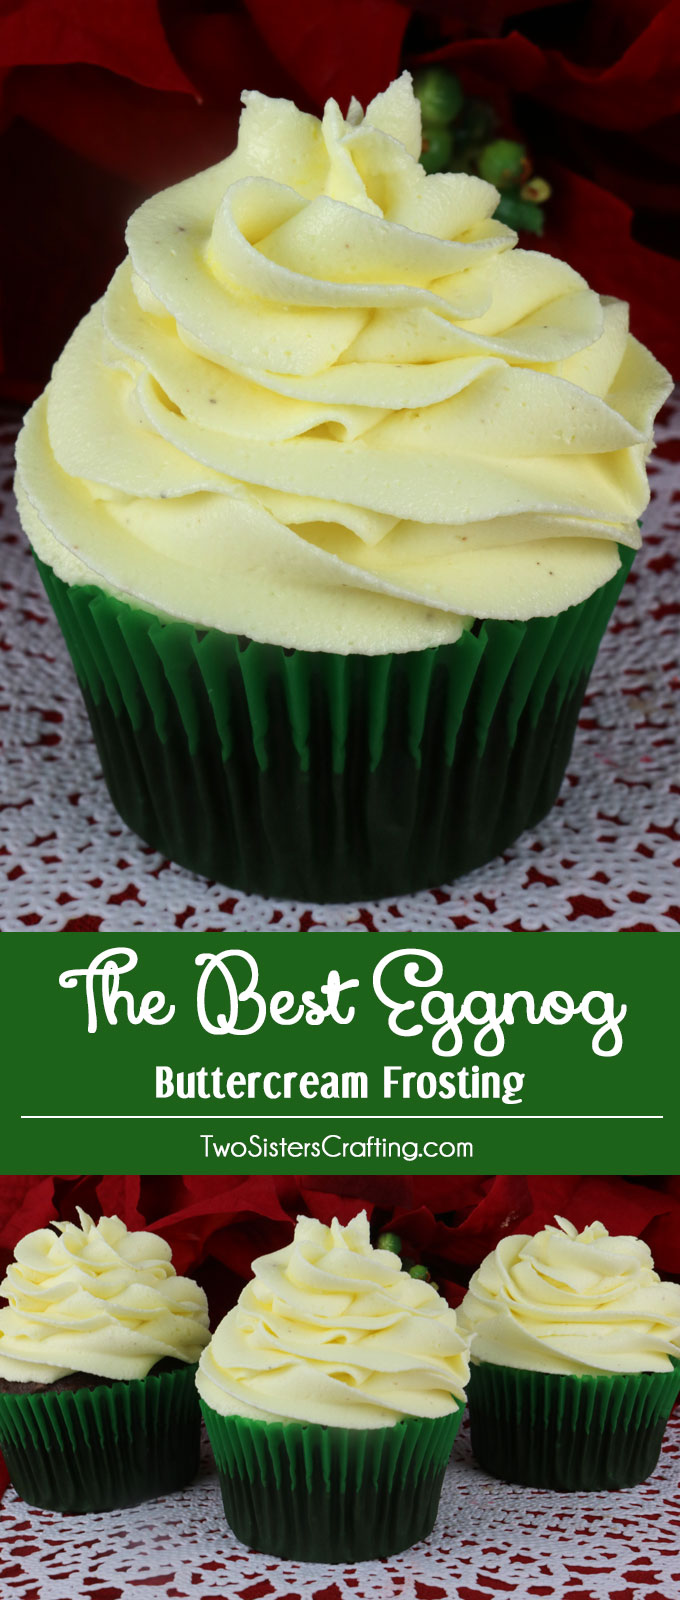 The Best Eggnog Buttercream Frosting - Two Sisters